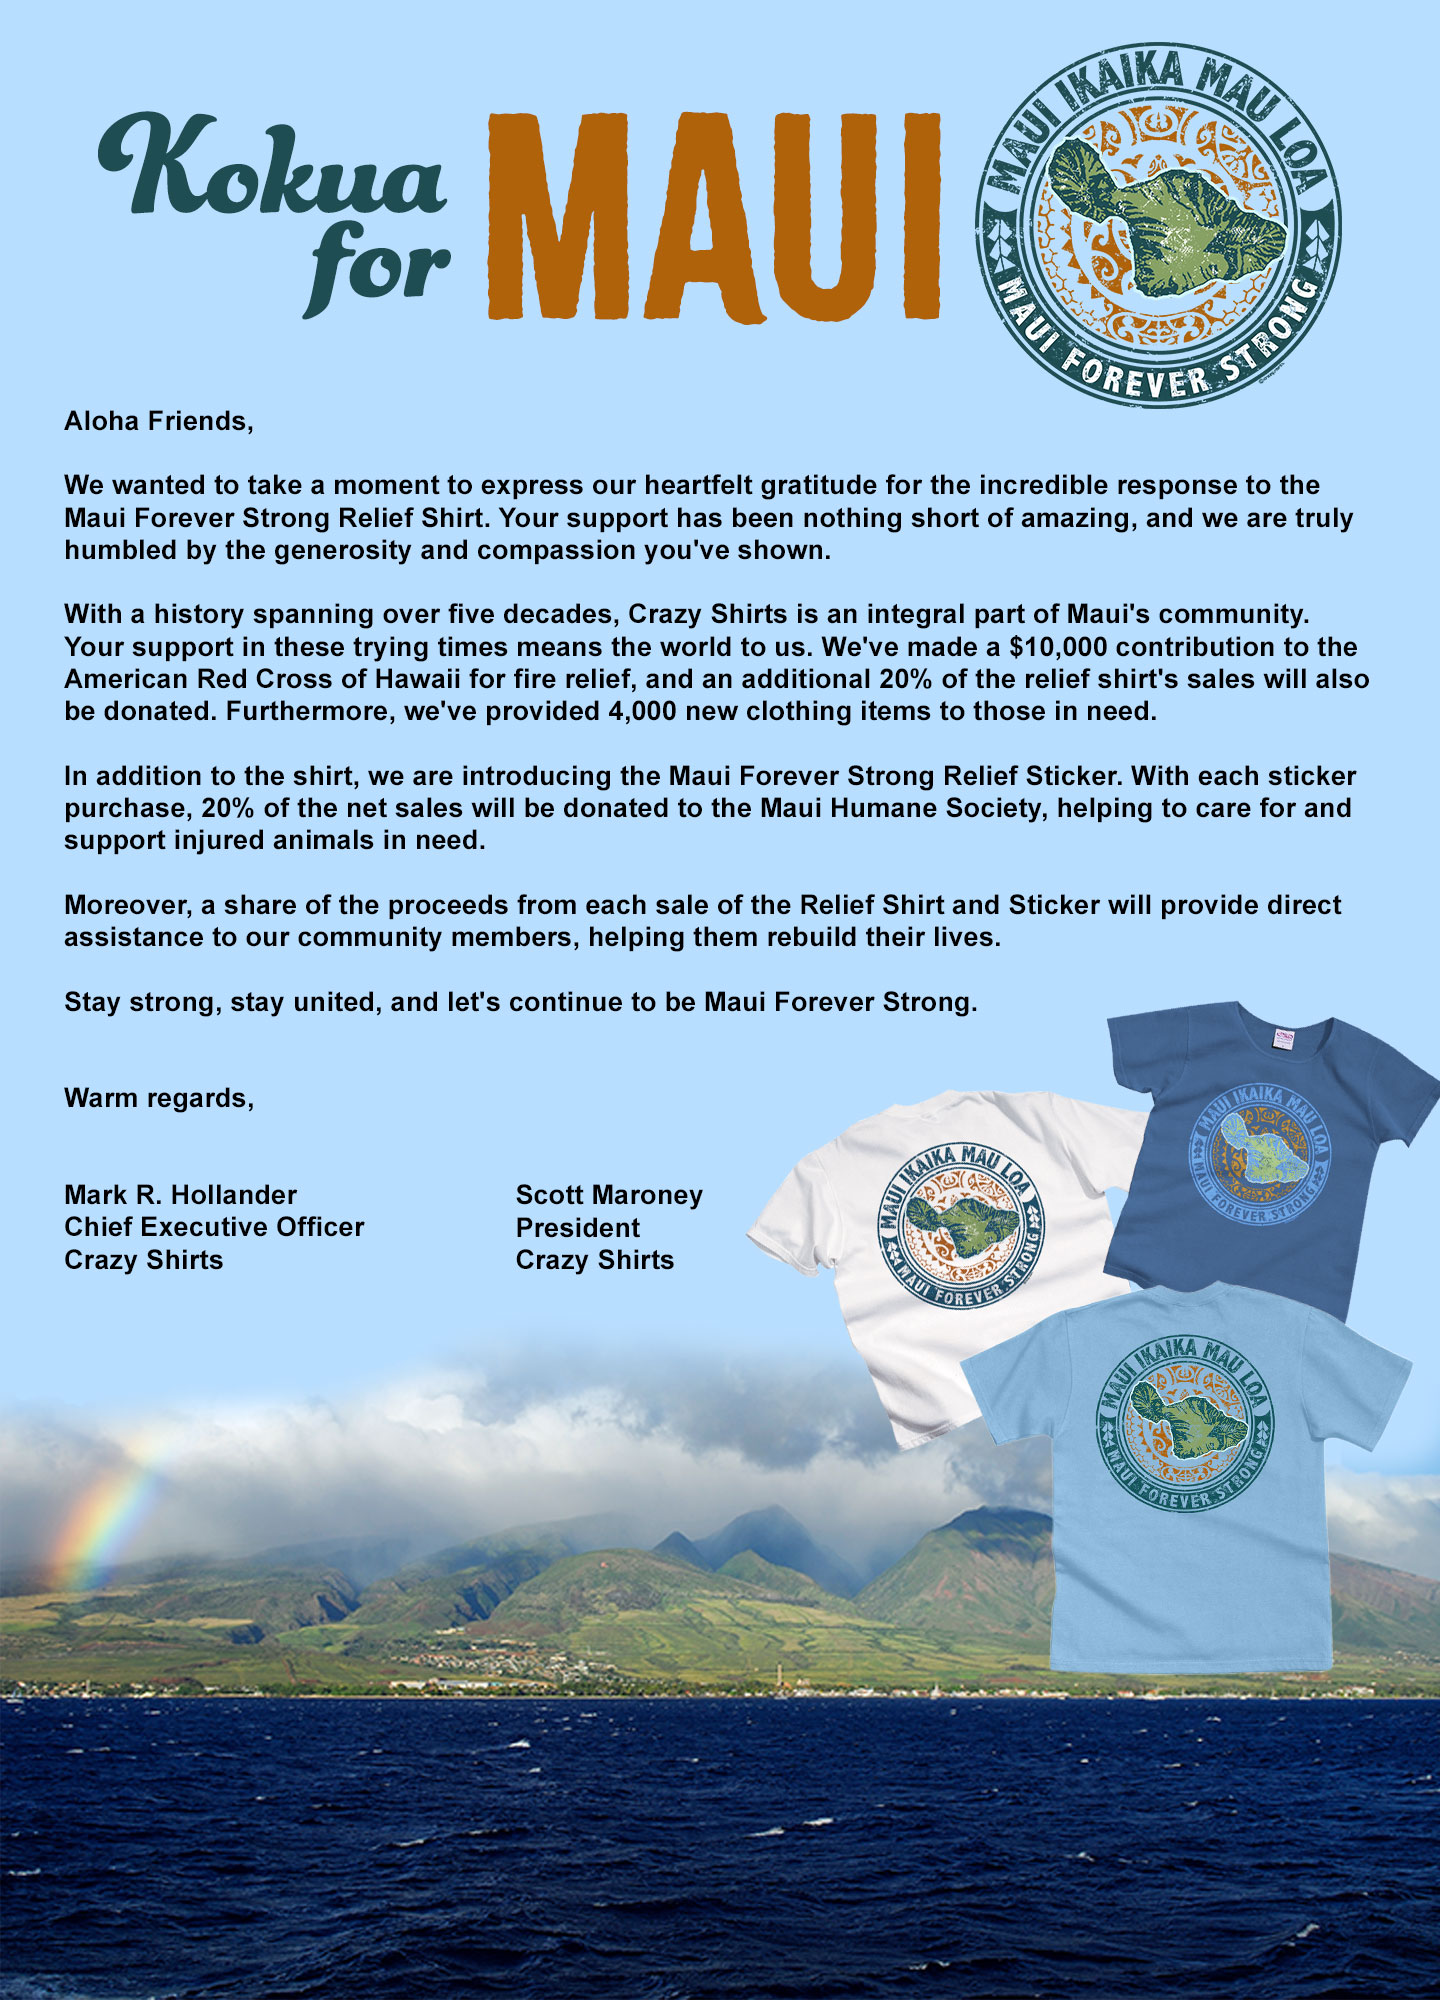 Kokua For Maui

Aloha Friends,

We wanted to take a moment to express our heartfelt gratitude for the incredible response to the Maui Forever Strong Relief Shirt. Your support has been nothing short of amazing, and we are truly humbled by the generosity and compassion you've shown.

With a history spanning over five decades, Crazy Shirts is an integral part of Maui's community. Your support in these trying times means the world to us. We've made a $10,000 contribution to the American Red Cross of Hawaii for fire relief, and an additional 20% of the relief shirt's sales will also be donated. Furthermore, we've provided 4,000 new clothing items to those in need.

In addition to the shirt, we are introducing the Maui Forever Strong Relief Sticker. With each sticker purchase, 20% of the net sales will be donated to the Maui Humane Society, helping to care for and support injured animals in need.

Moreover, a share of the proceeds from each sale of the Relief Shirt and Sticker will provide direct assistance to our community members, helping them rebuild their lives.

Stay strong, stay united, and let's continue to be Maui Forever Strong.

 
Warm regards,
 

Mark R. Hollander
Chief Executive Officer
Crazy Shirts

Scott Maroney
President
Crazy Shirts